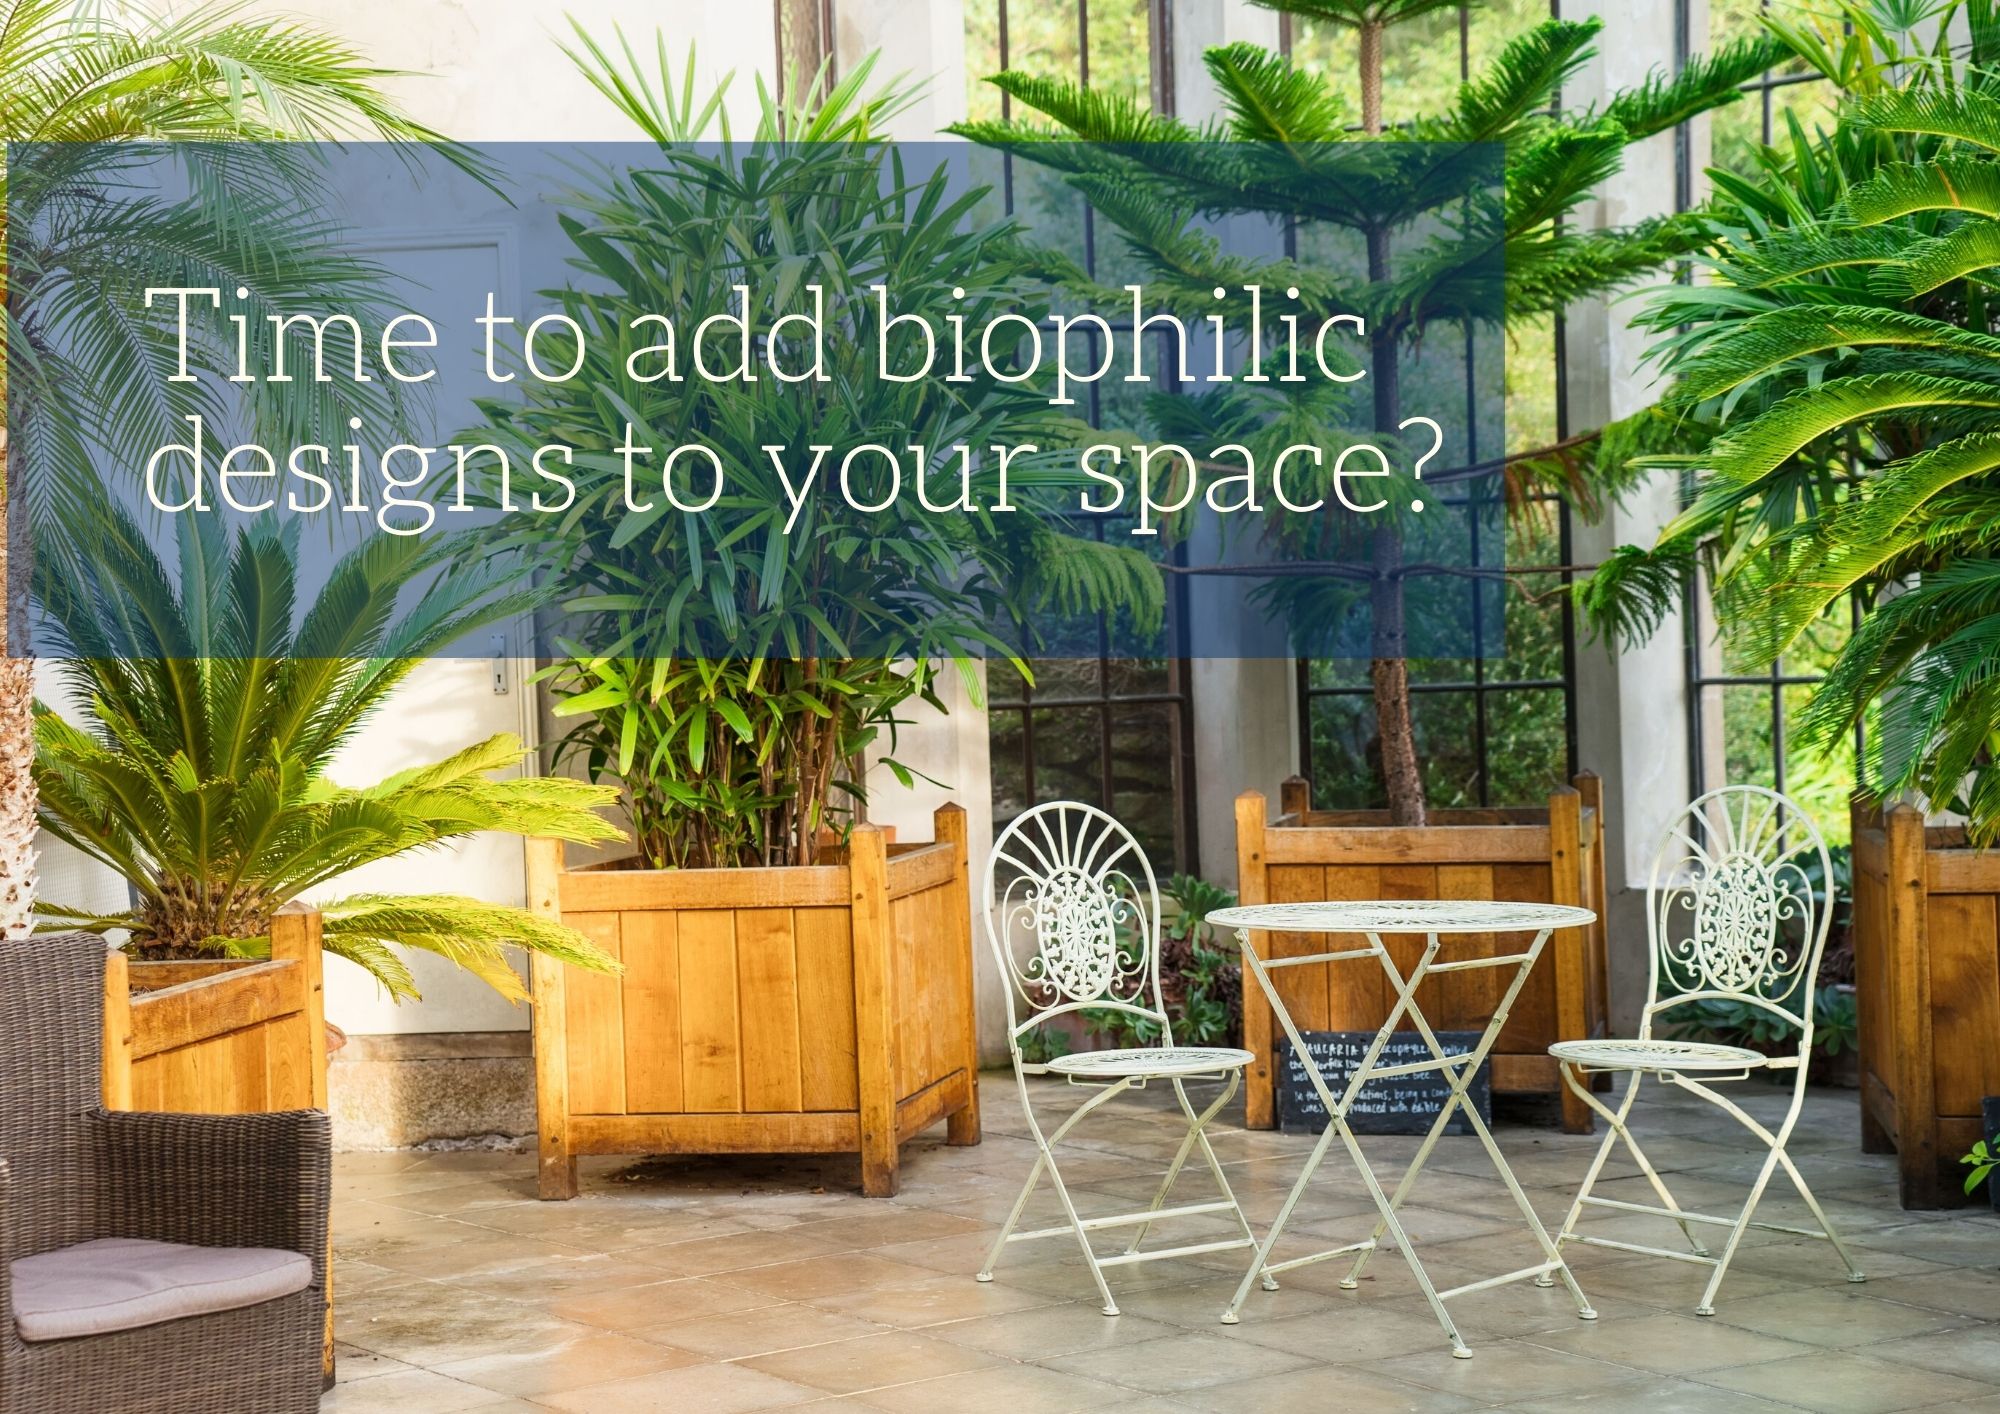 Time to add biophilic designs to your space_